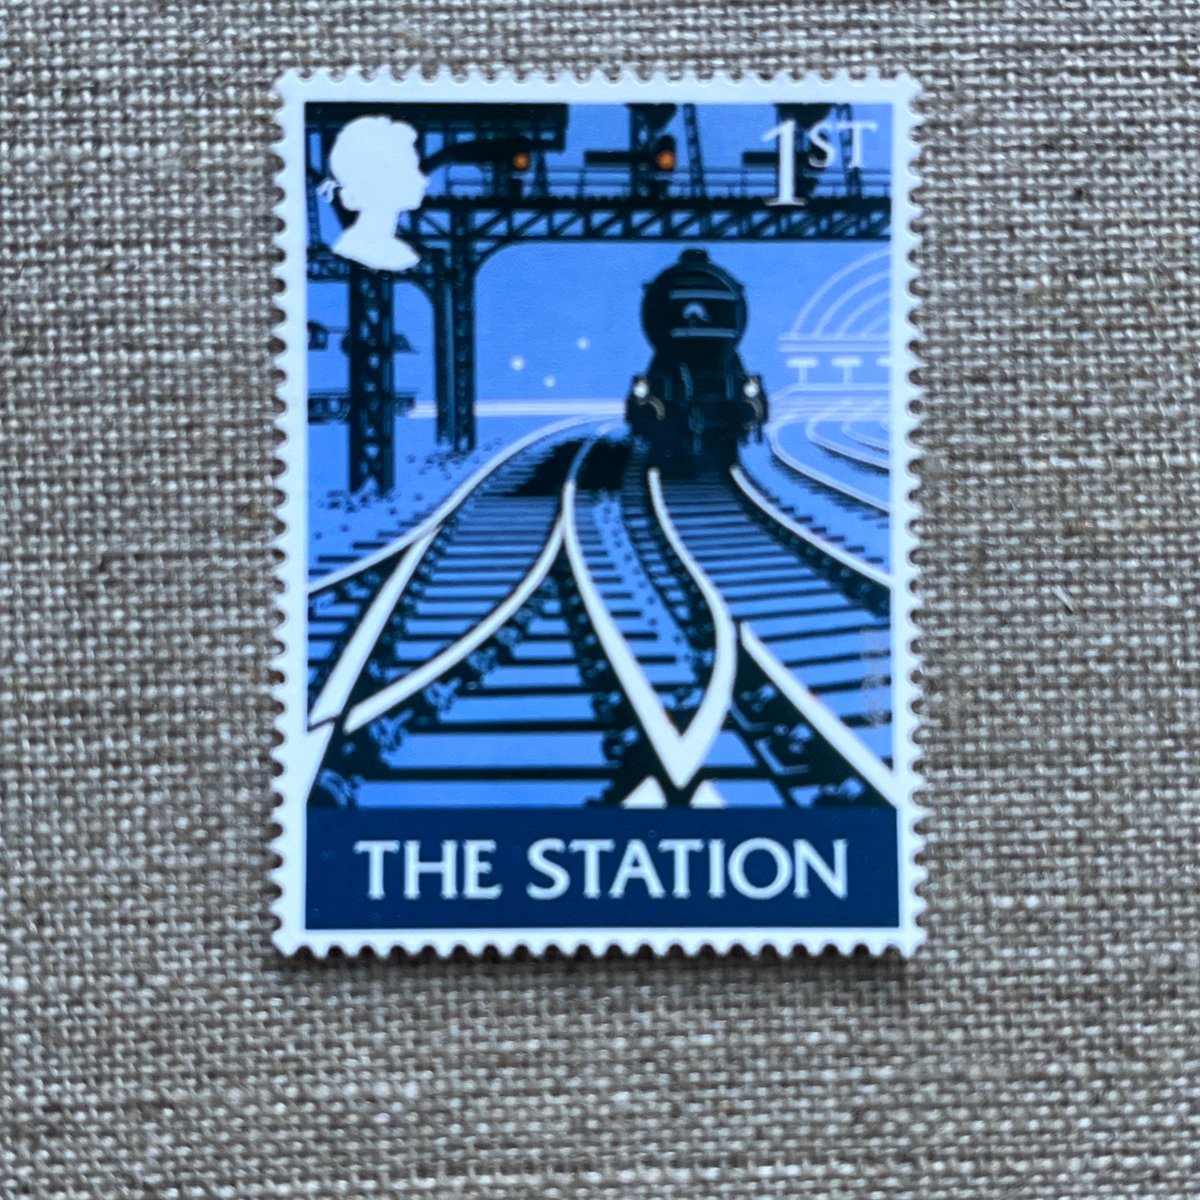 Stunning blue artwork 
The Station, just listed in my website. ( link on bio )
#trains #pubsigns #blueart #traintracks #philatley #postagestampart